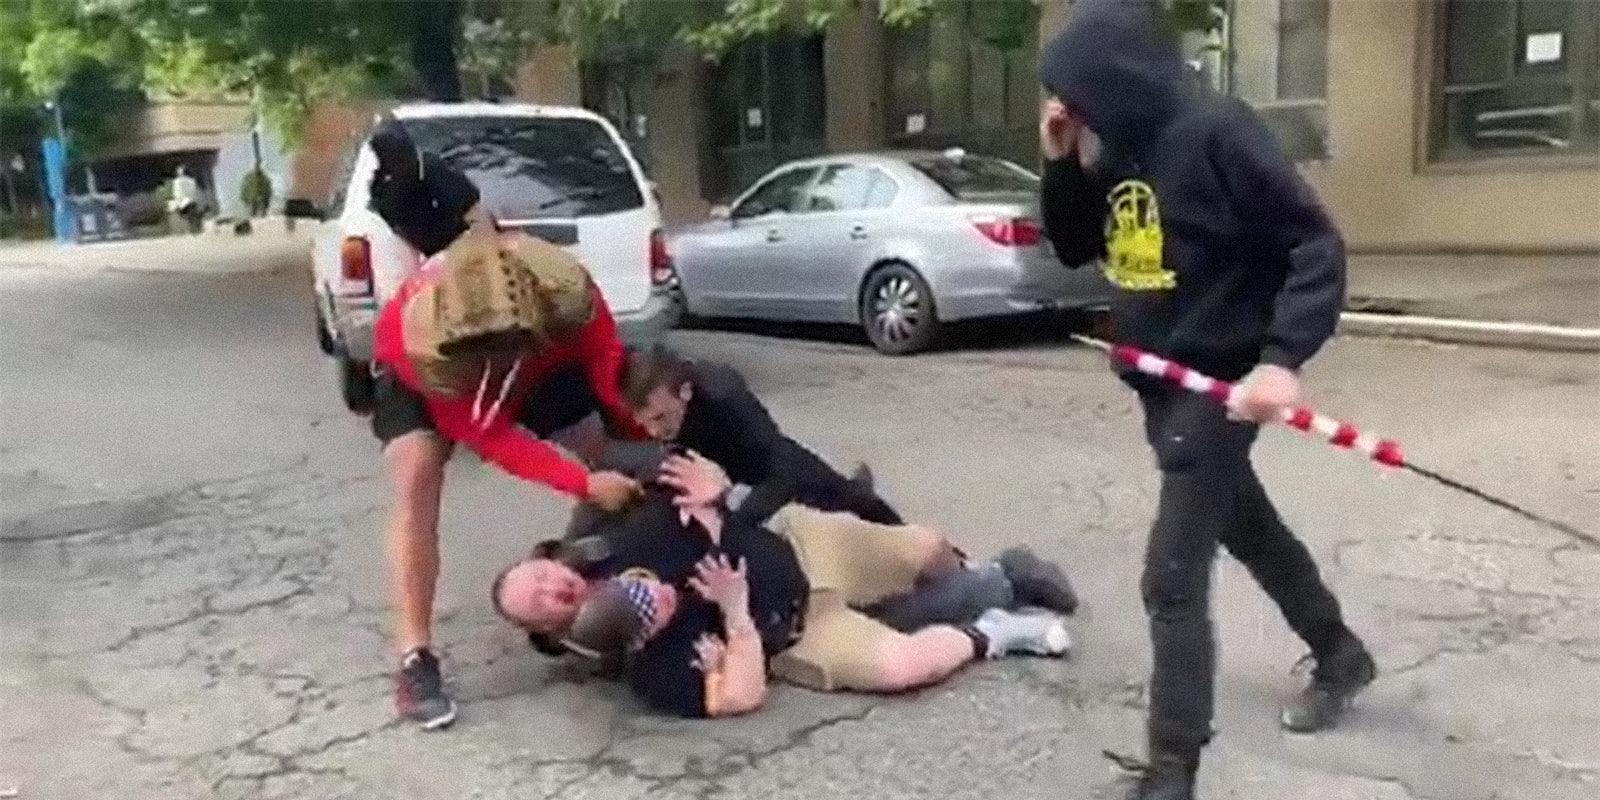 four 'Proud Boys' attack a man in the street